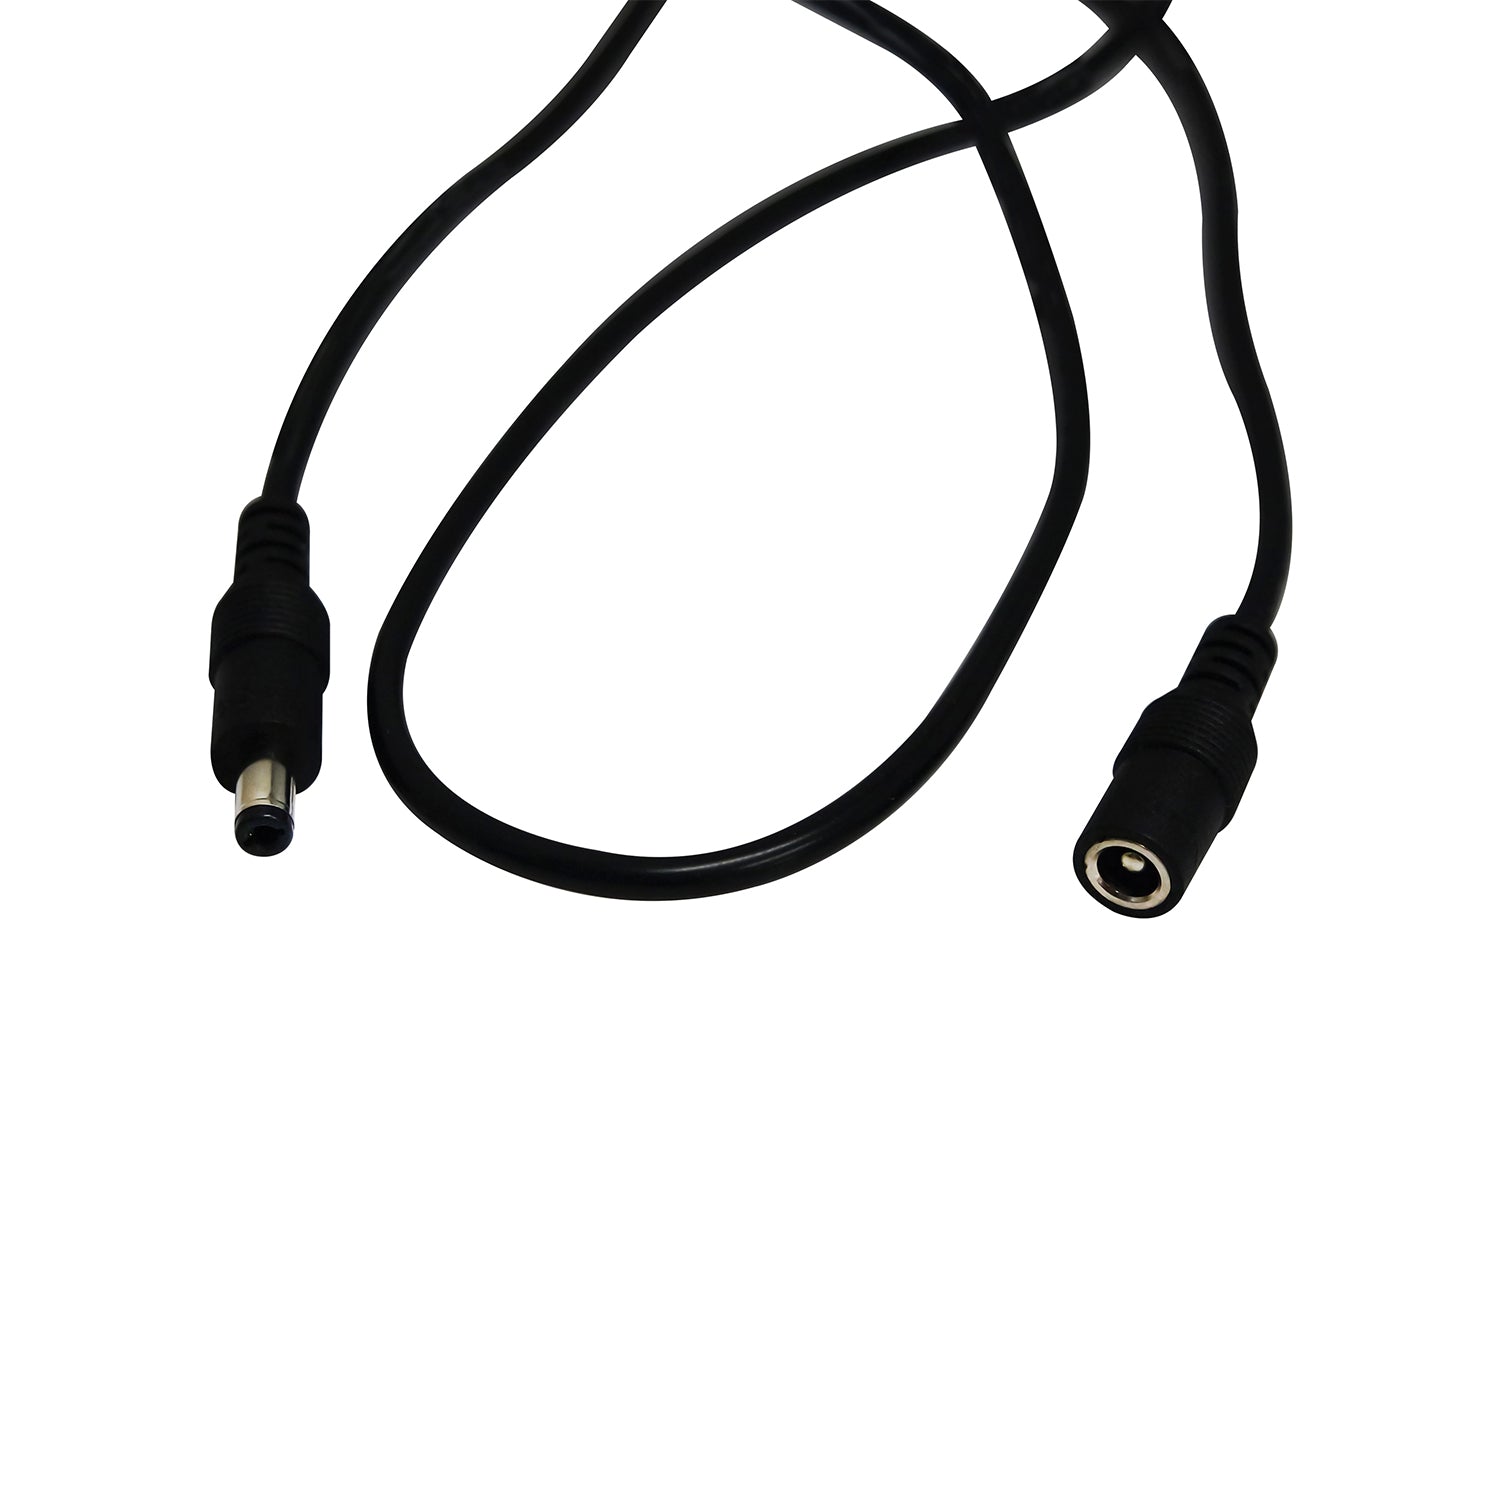 3 Ft External Power Extender Cable for GPS Receivers -GNSS Receivers- eGPS Solutions Inc.